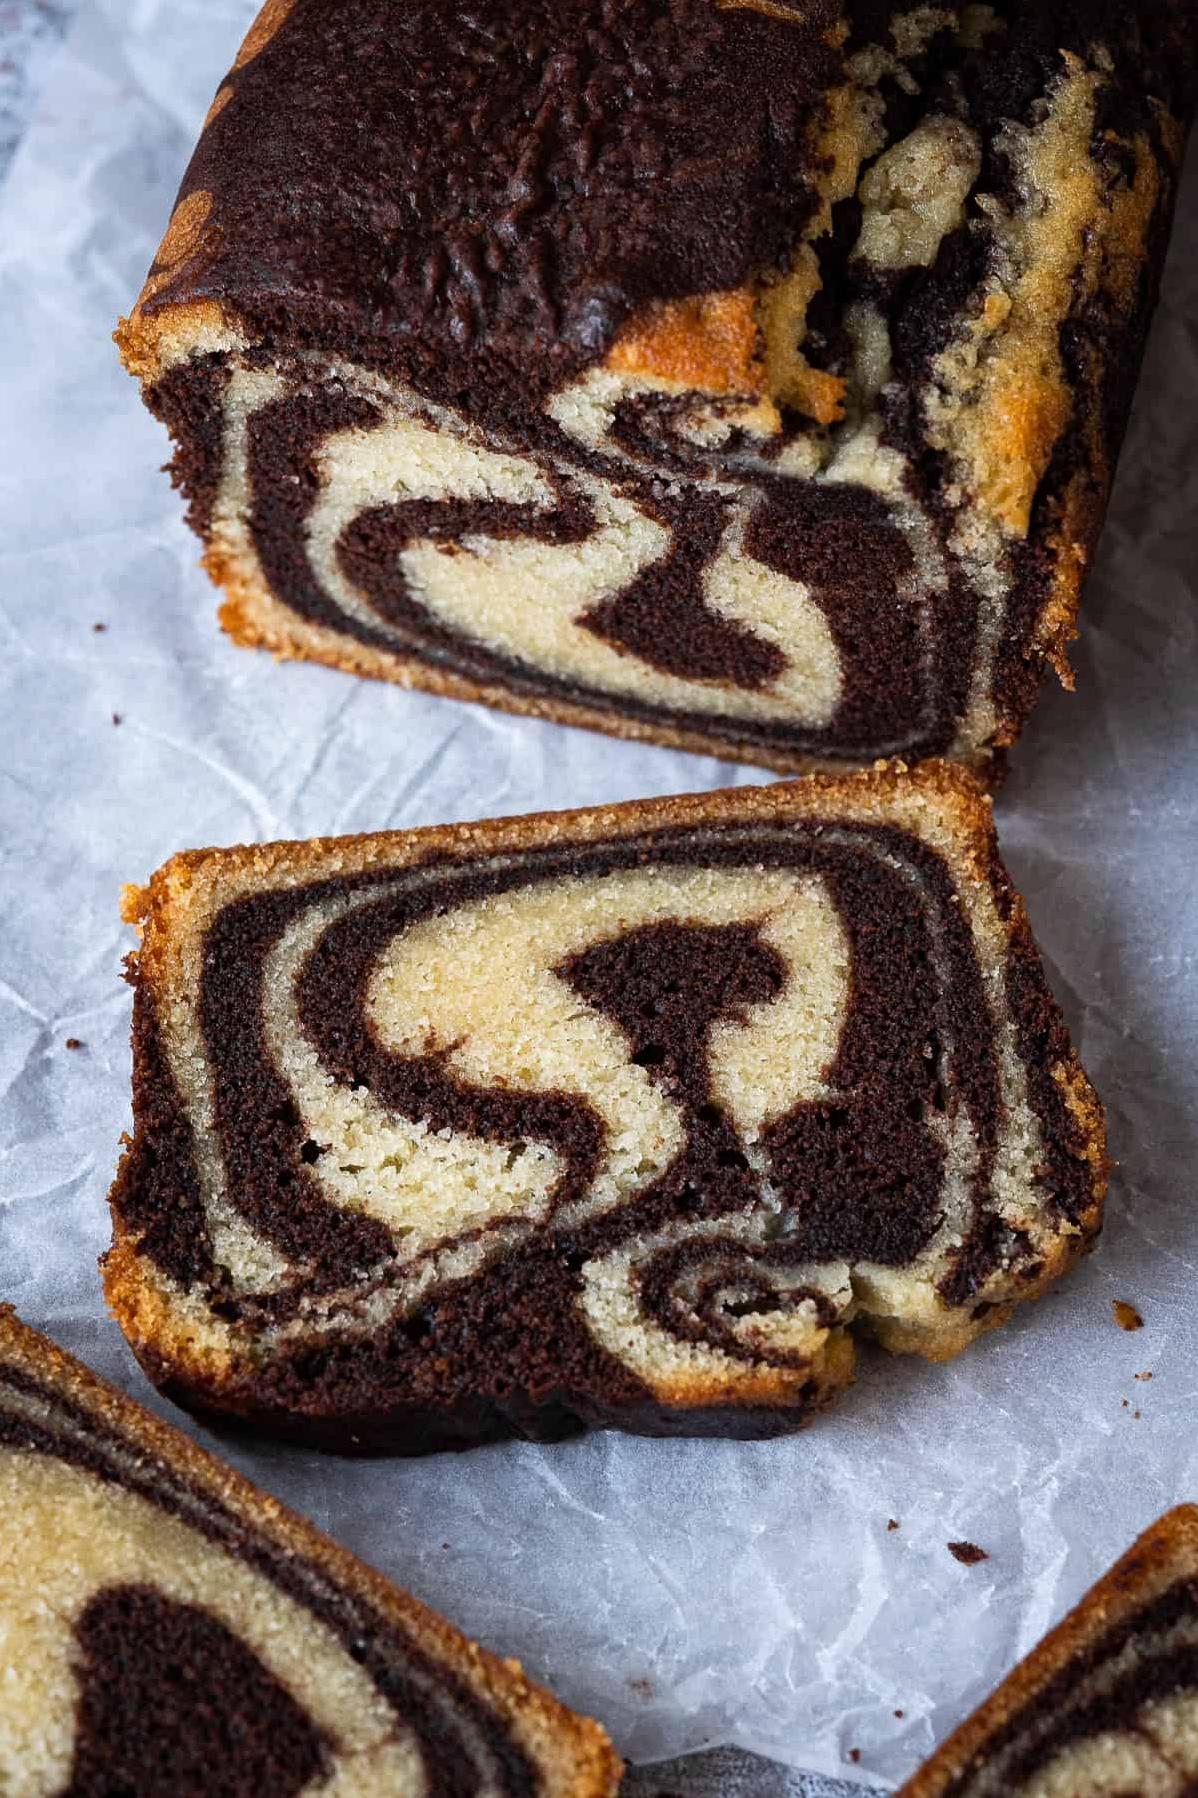  This cake is so delicious, you won’t even know it’s vegan!